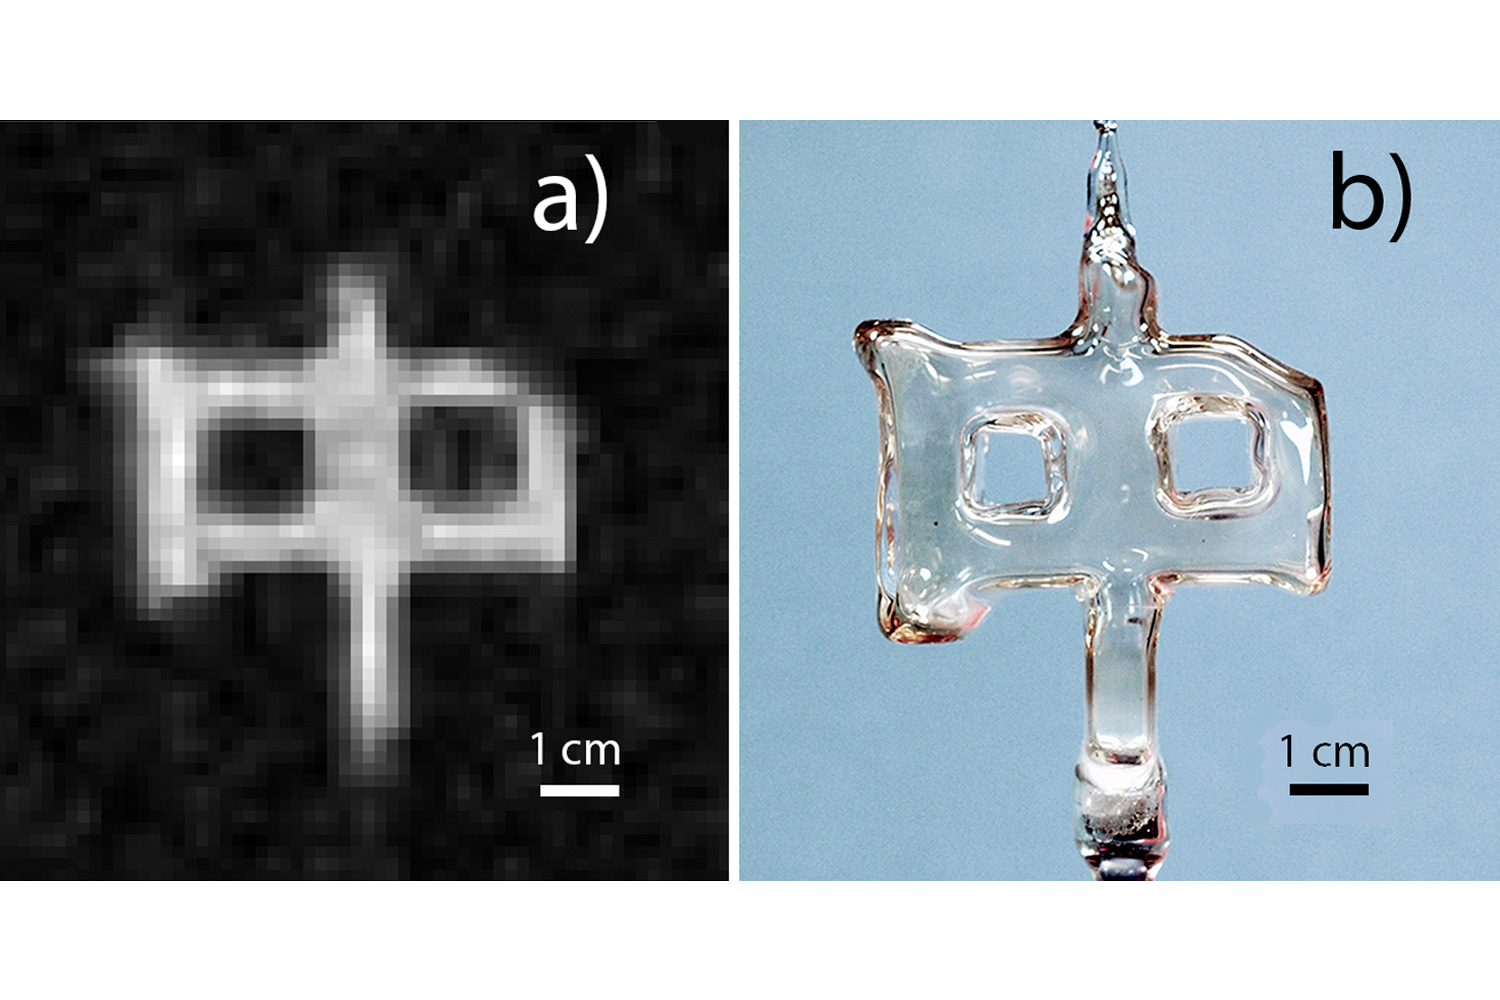 Photo A is an image of a sealed glass cell obtained by UVA physicists by combining magnetic-resonance techniques with the detection of gamma rays emitted by an isotope of xenon contained within the cell. Image B is an ordinary photograph of the glass cell.